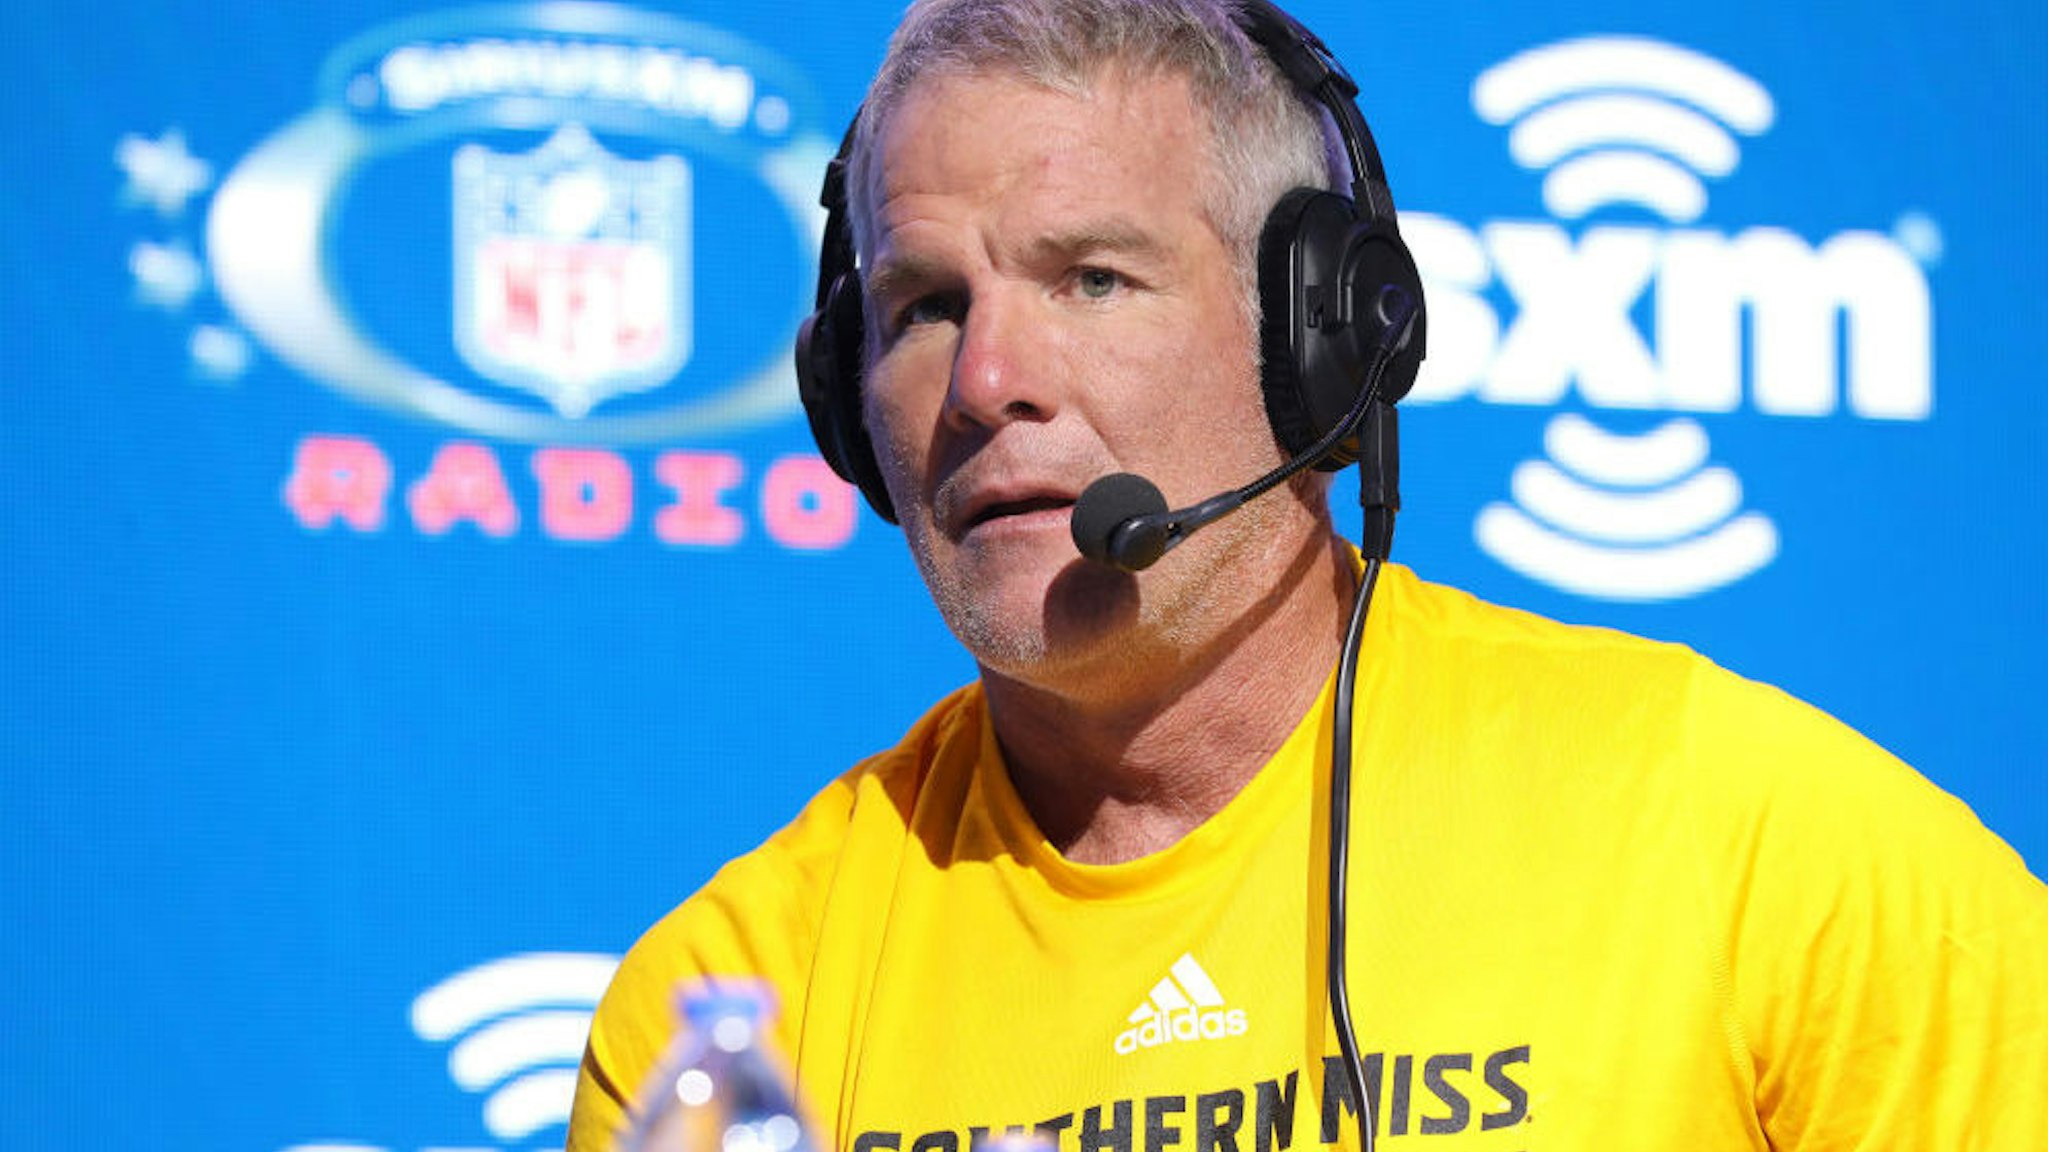 Former NFL player Brett Favre speaks onstage during day 3 of SiriusXM at Super Bowl LIV on January 31, 2020 in Miami, Florida.